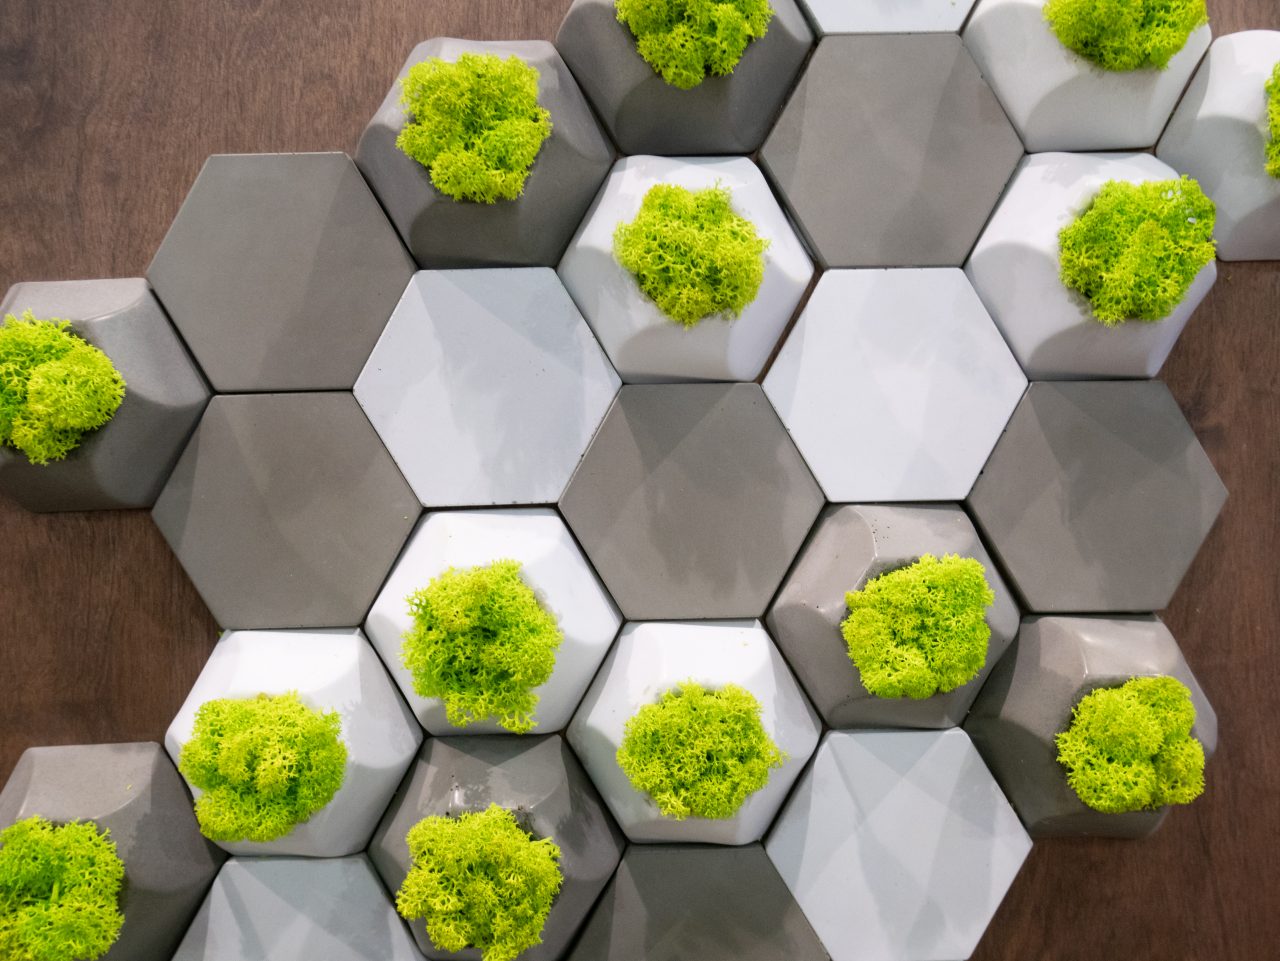 Geometric Pattern on Wall Art Made of Hexagons and Plants